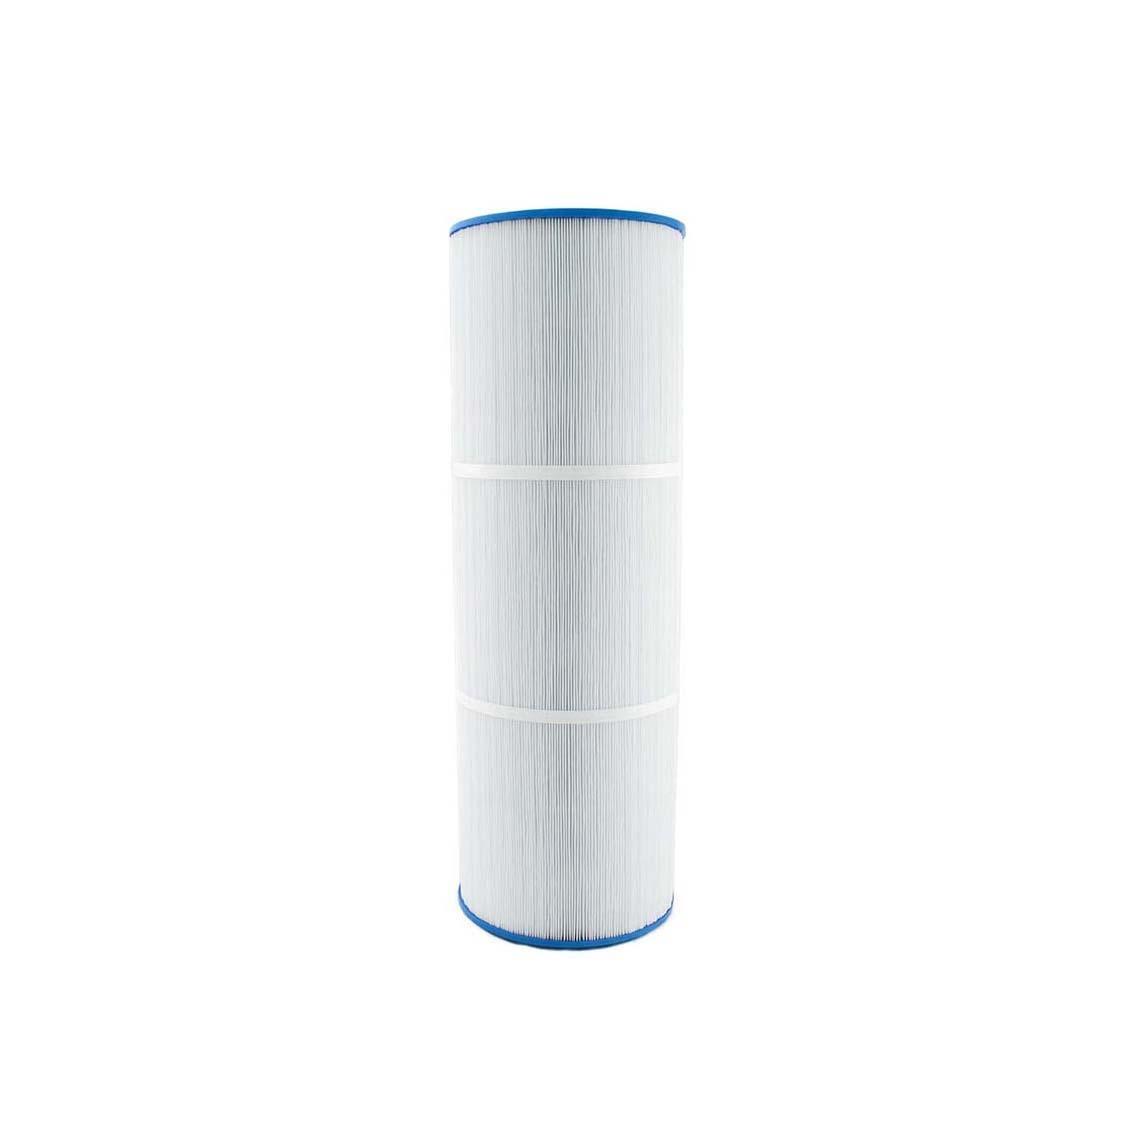 Product main image -  Hurlcon ZX250 Replacement Filter Cartridge - 250sqft 